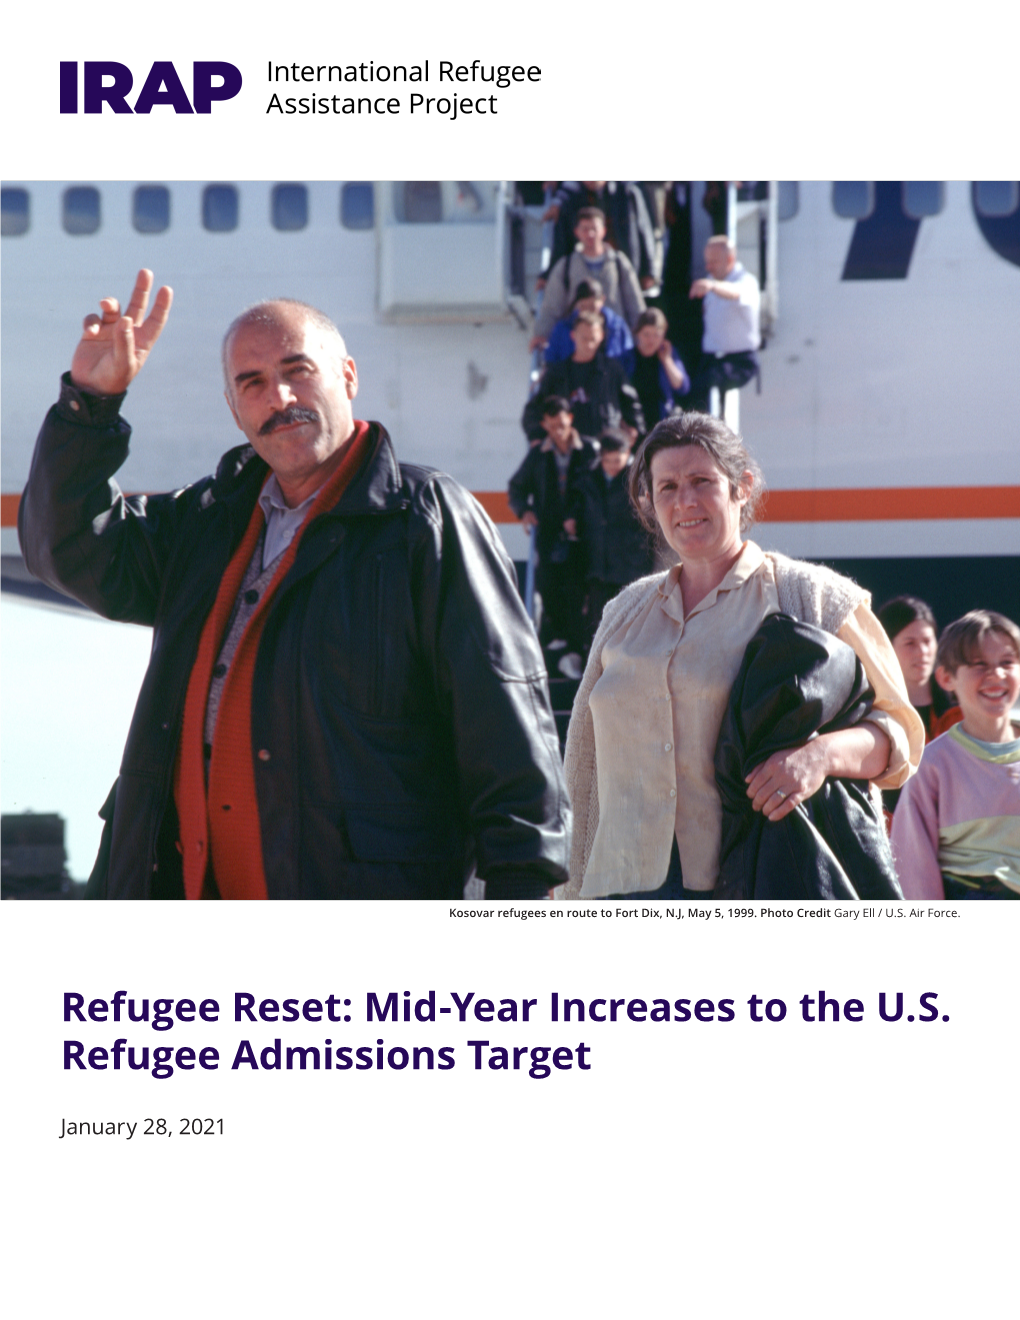 Mid-Year Increases to the US Refugee Admissions Target